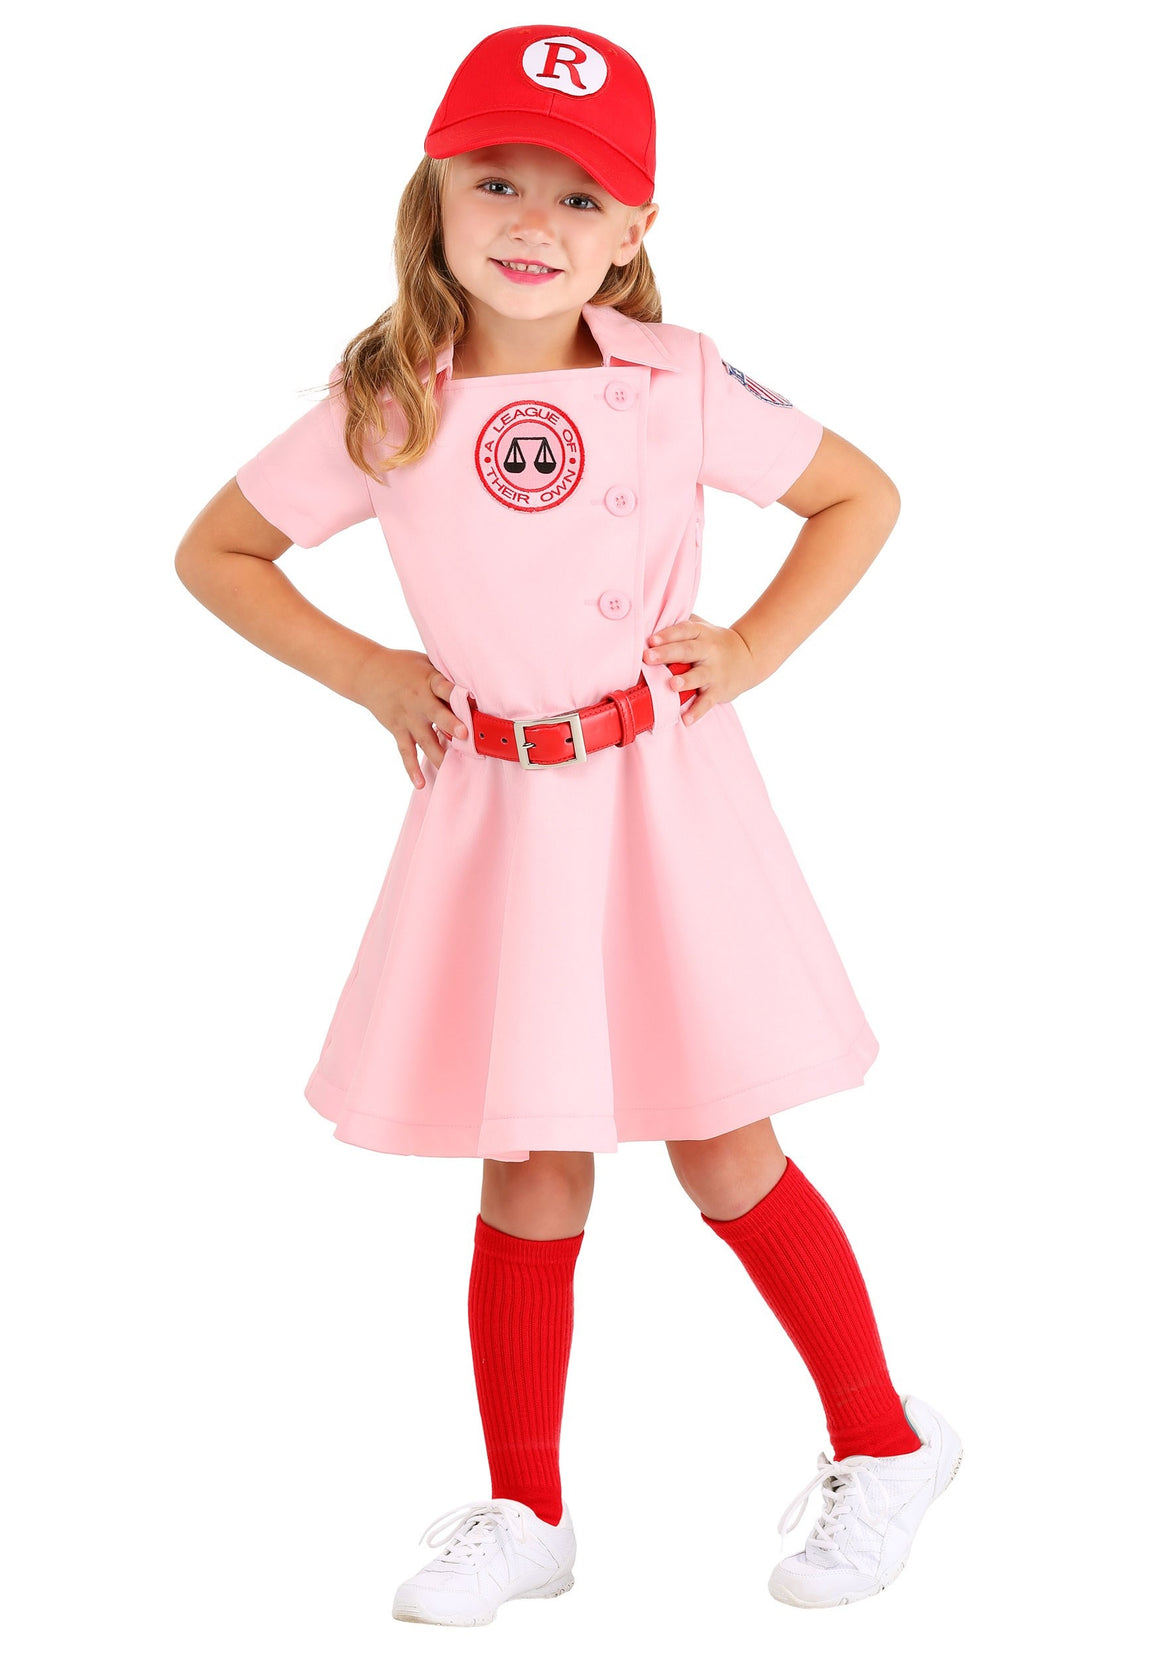 A League of Their Own Halloween Costumes – Kids Halloween Costumes